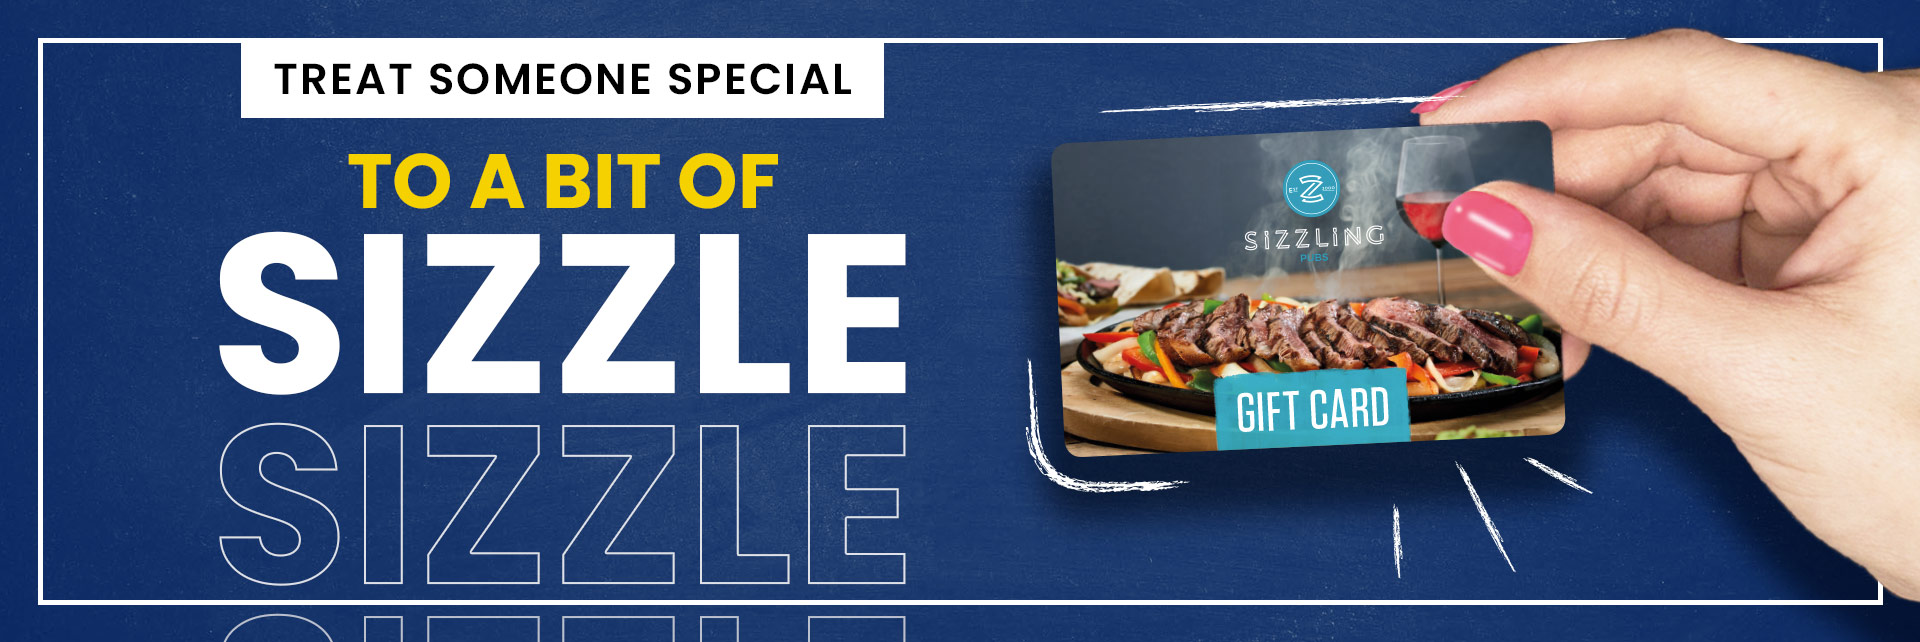 Sizzling Pubs Gift Card at The Merebrook in Wirral